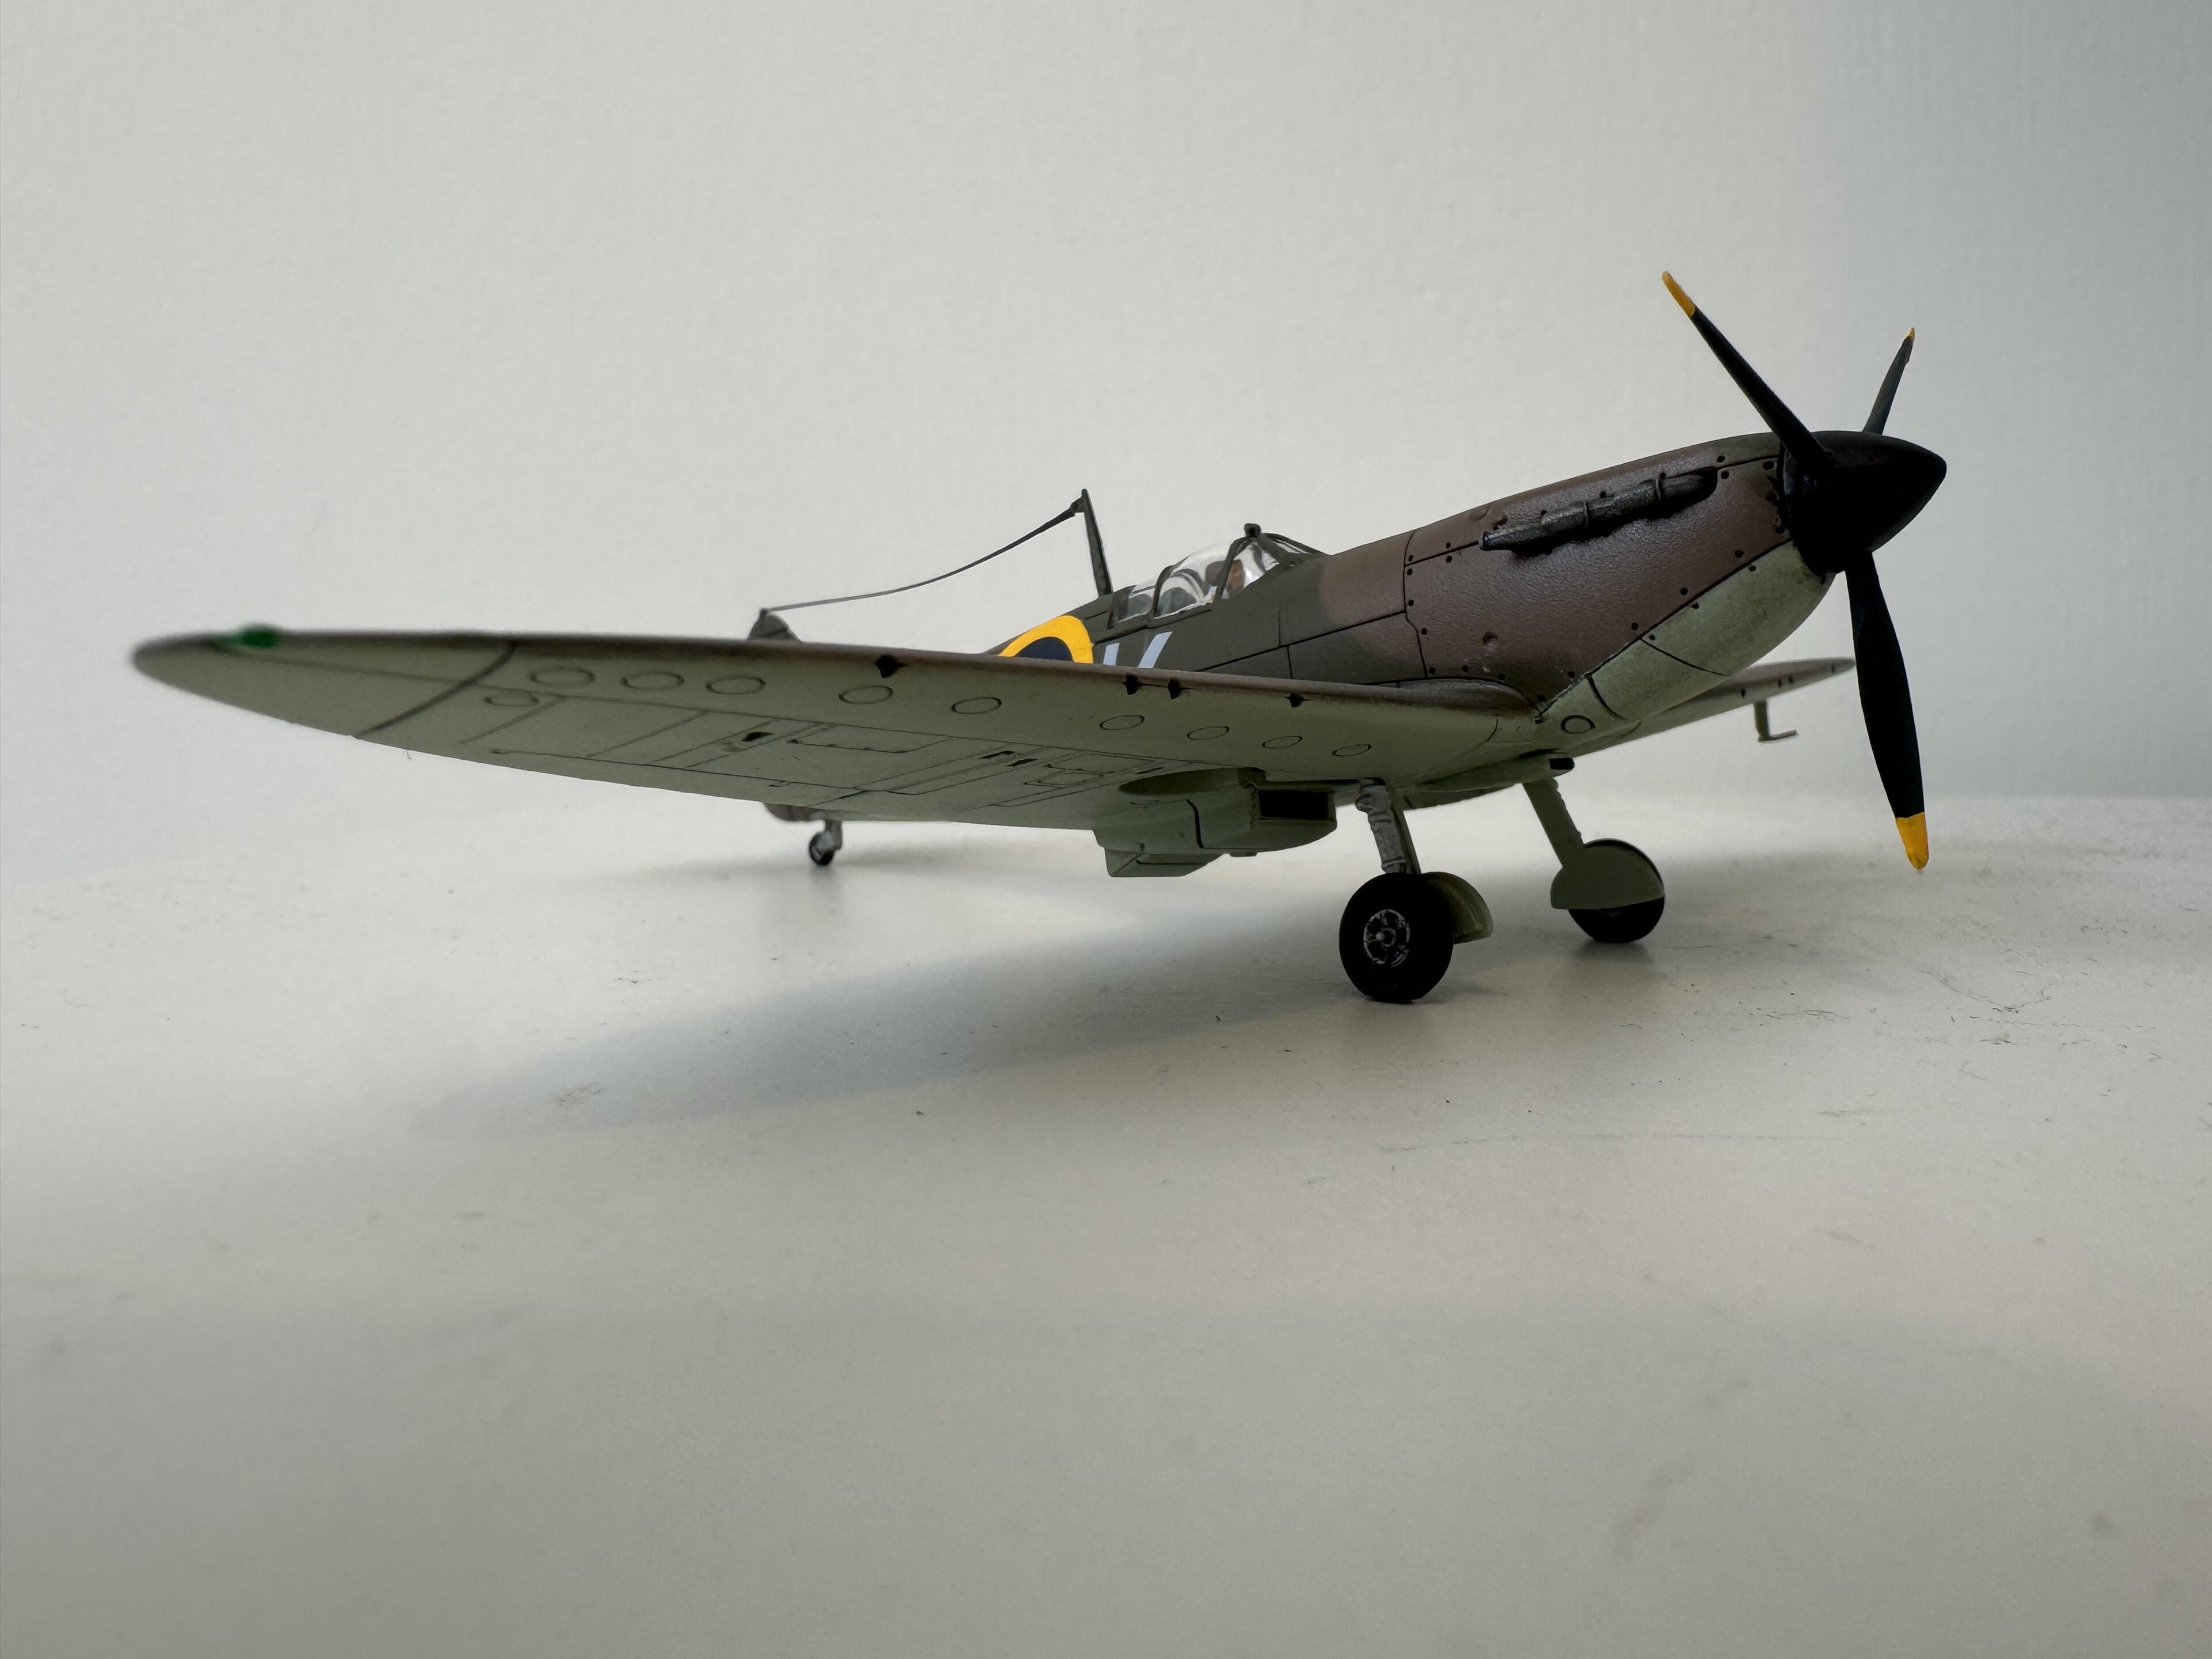 Pistonheads - The image shows a small-scale model of an old military aircraft. It's positioned on a flat surface and appears to be made of metal, as suggested by the shiny surface of the aircraft. The plane is painted in a realistic camouflage pattern with shades of green and brown, which suggests it may represent a historical military aircraft from World War II or similar era. The model has fine detailing, such as visible engine parts and the fuselage structure, indicating it's likely intended for display by model enthusiasts.